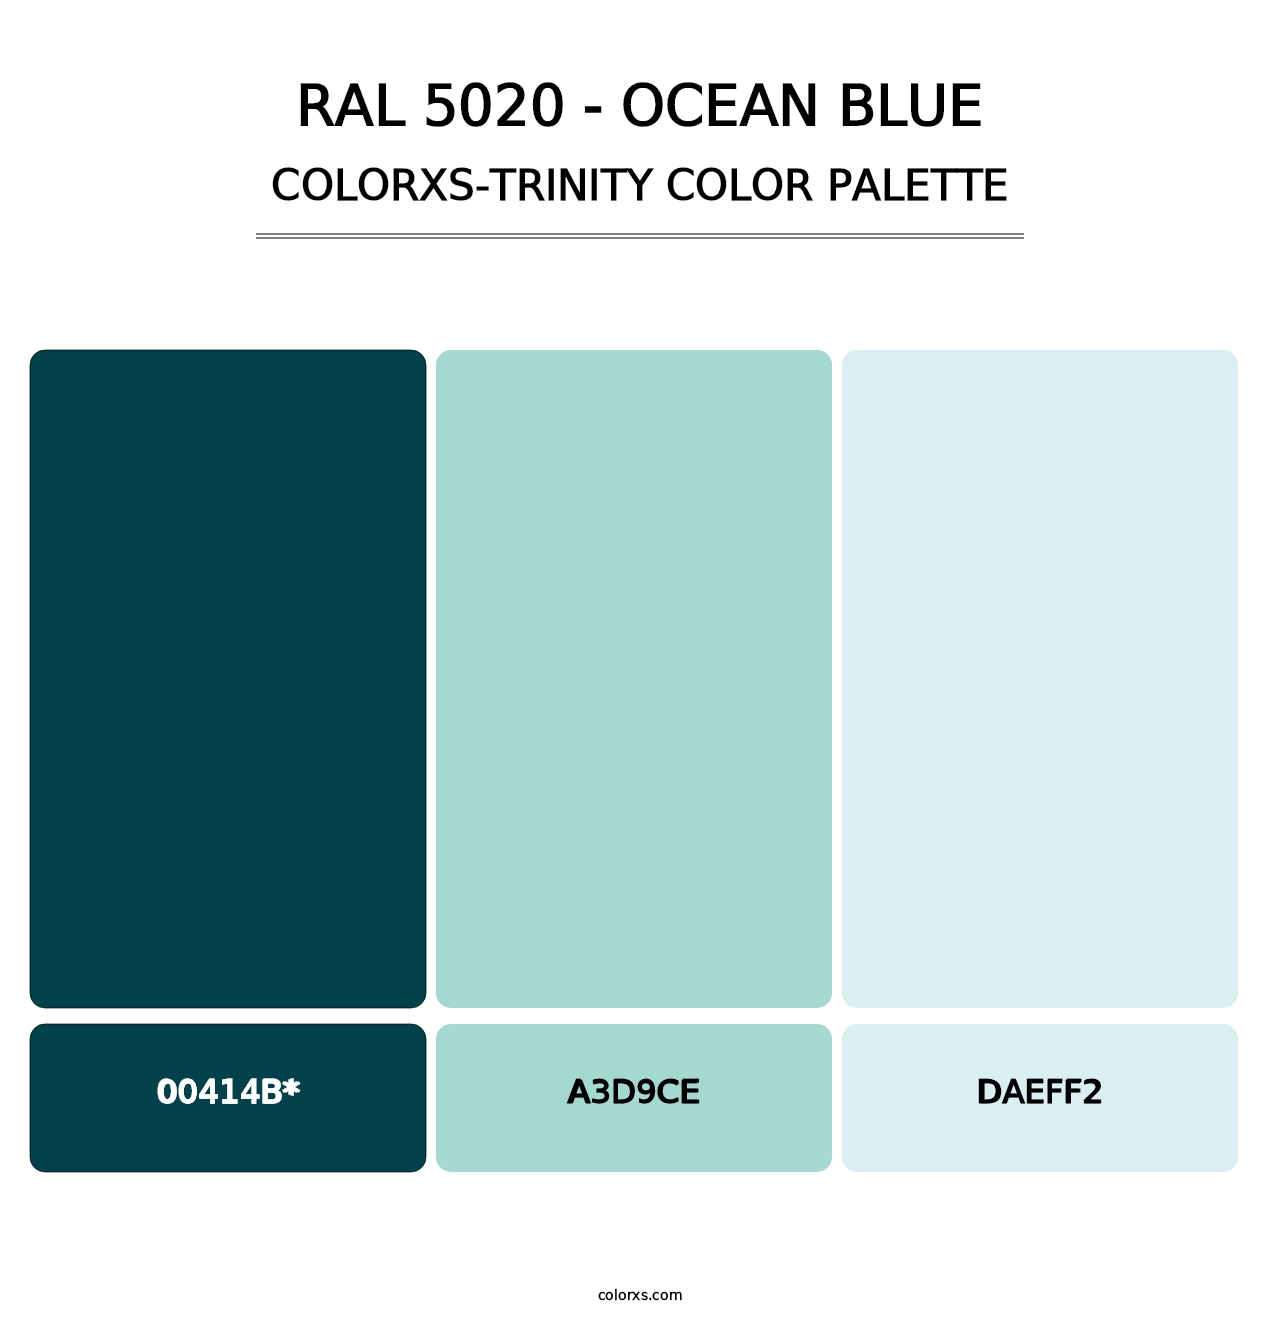 RAL 5020 - Ocean Blue - Colorxs Trinity Palette